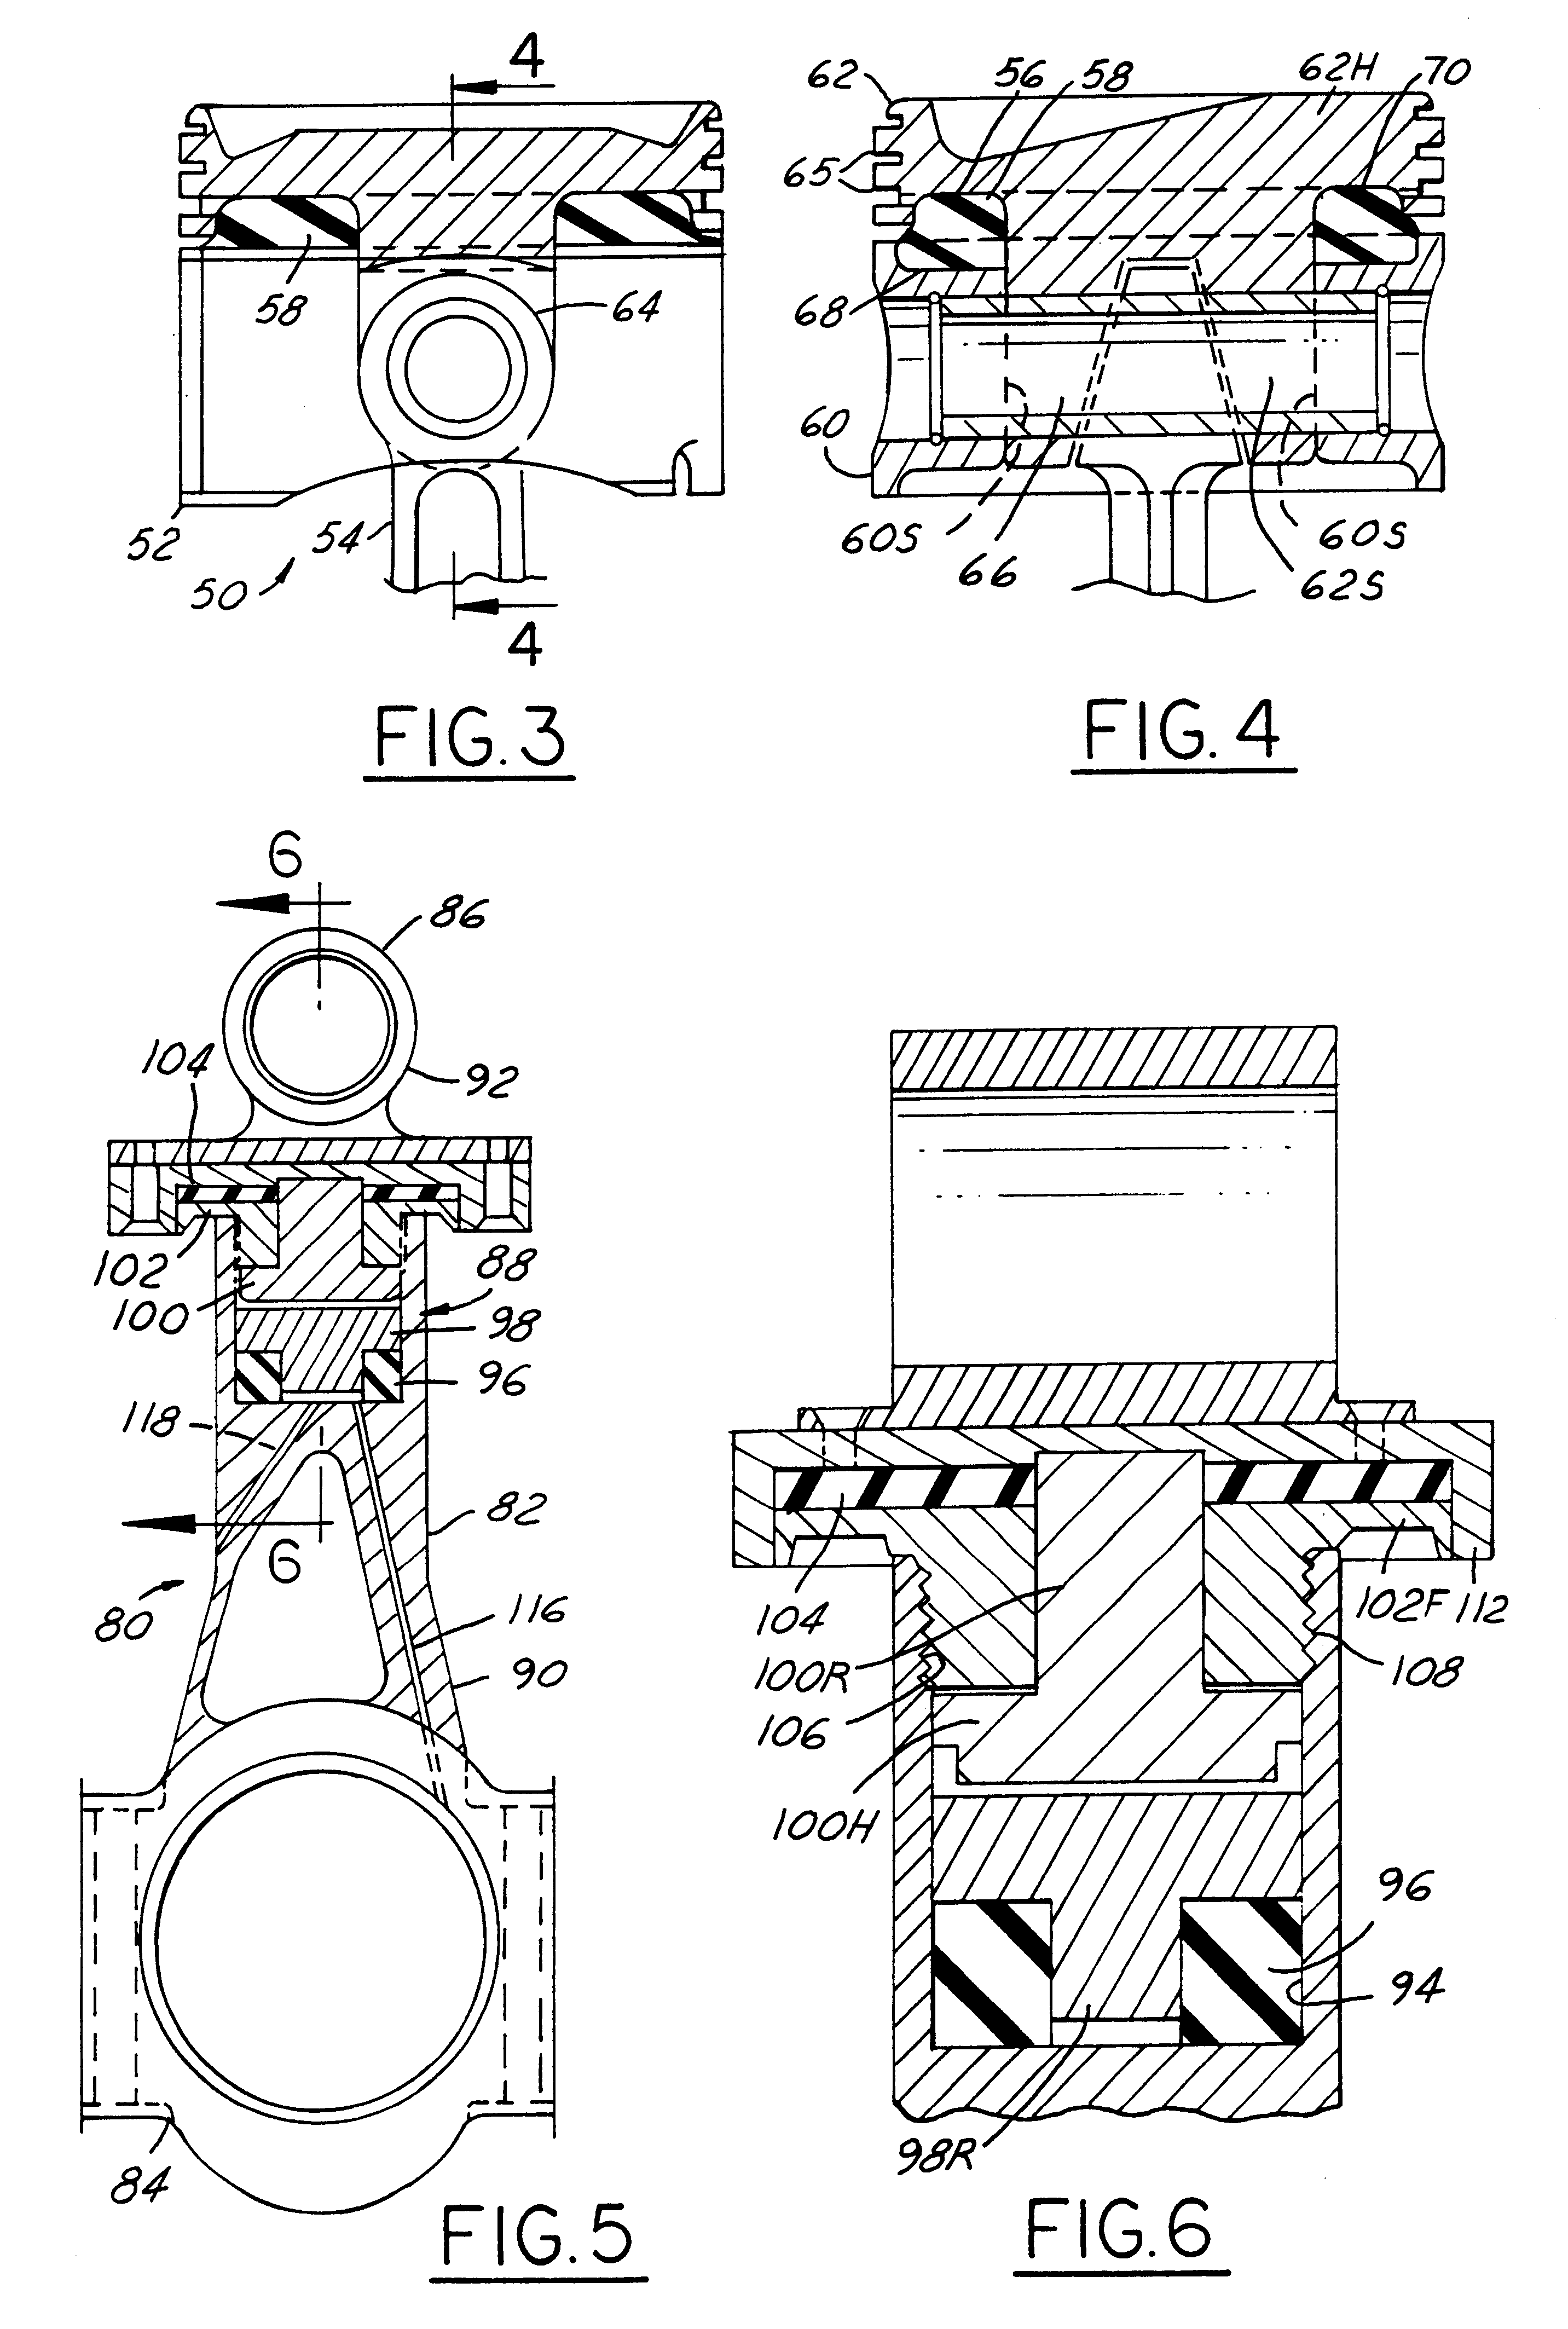 Variable compression ratio pistons and connecting rods